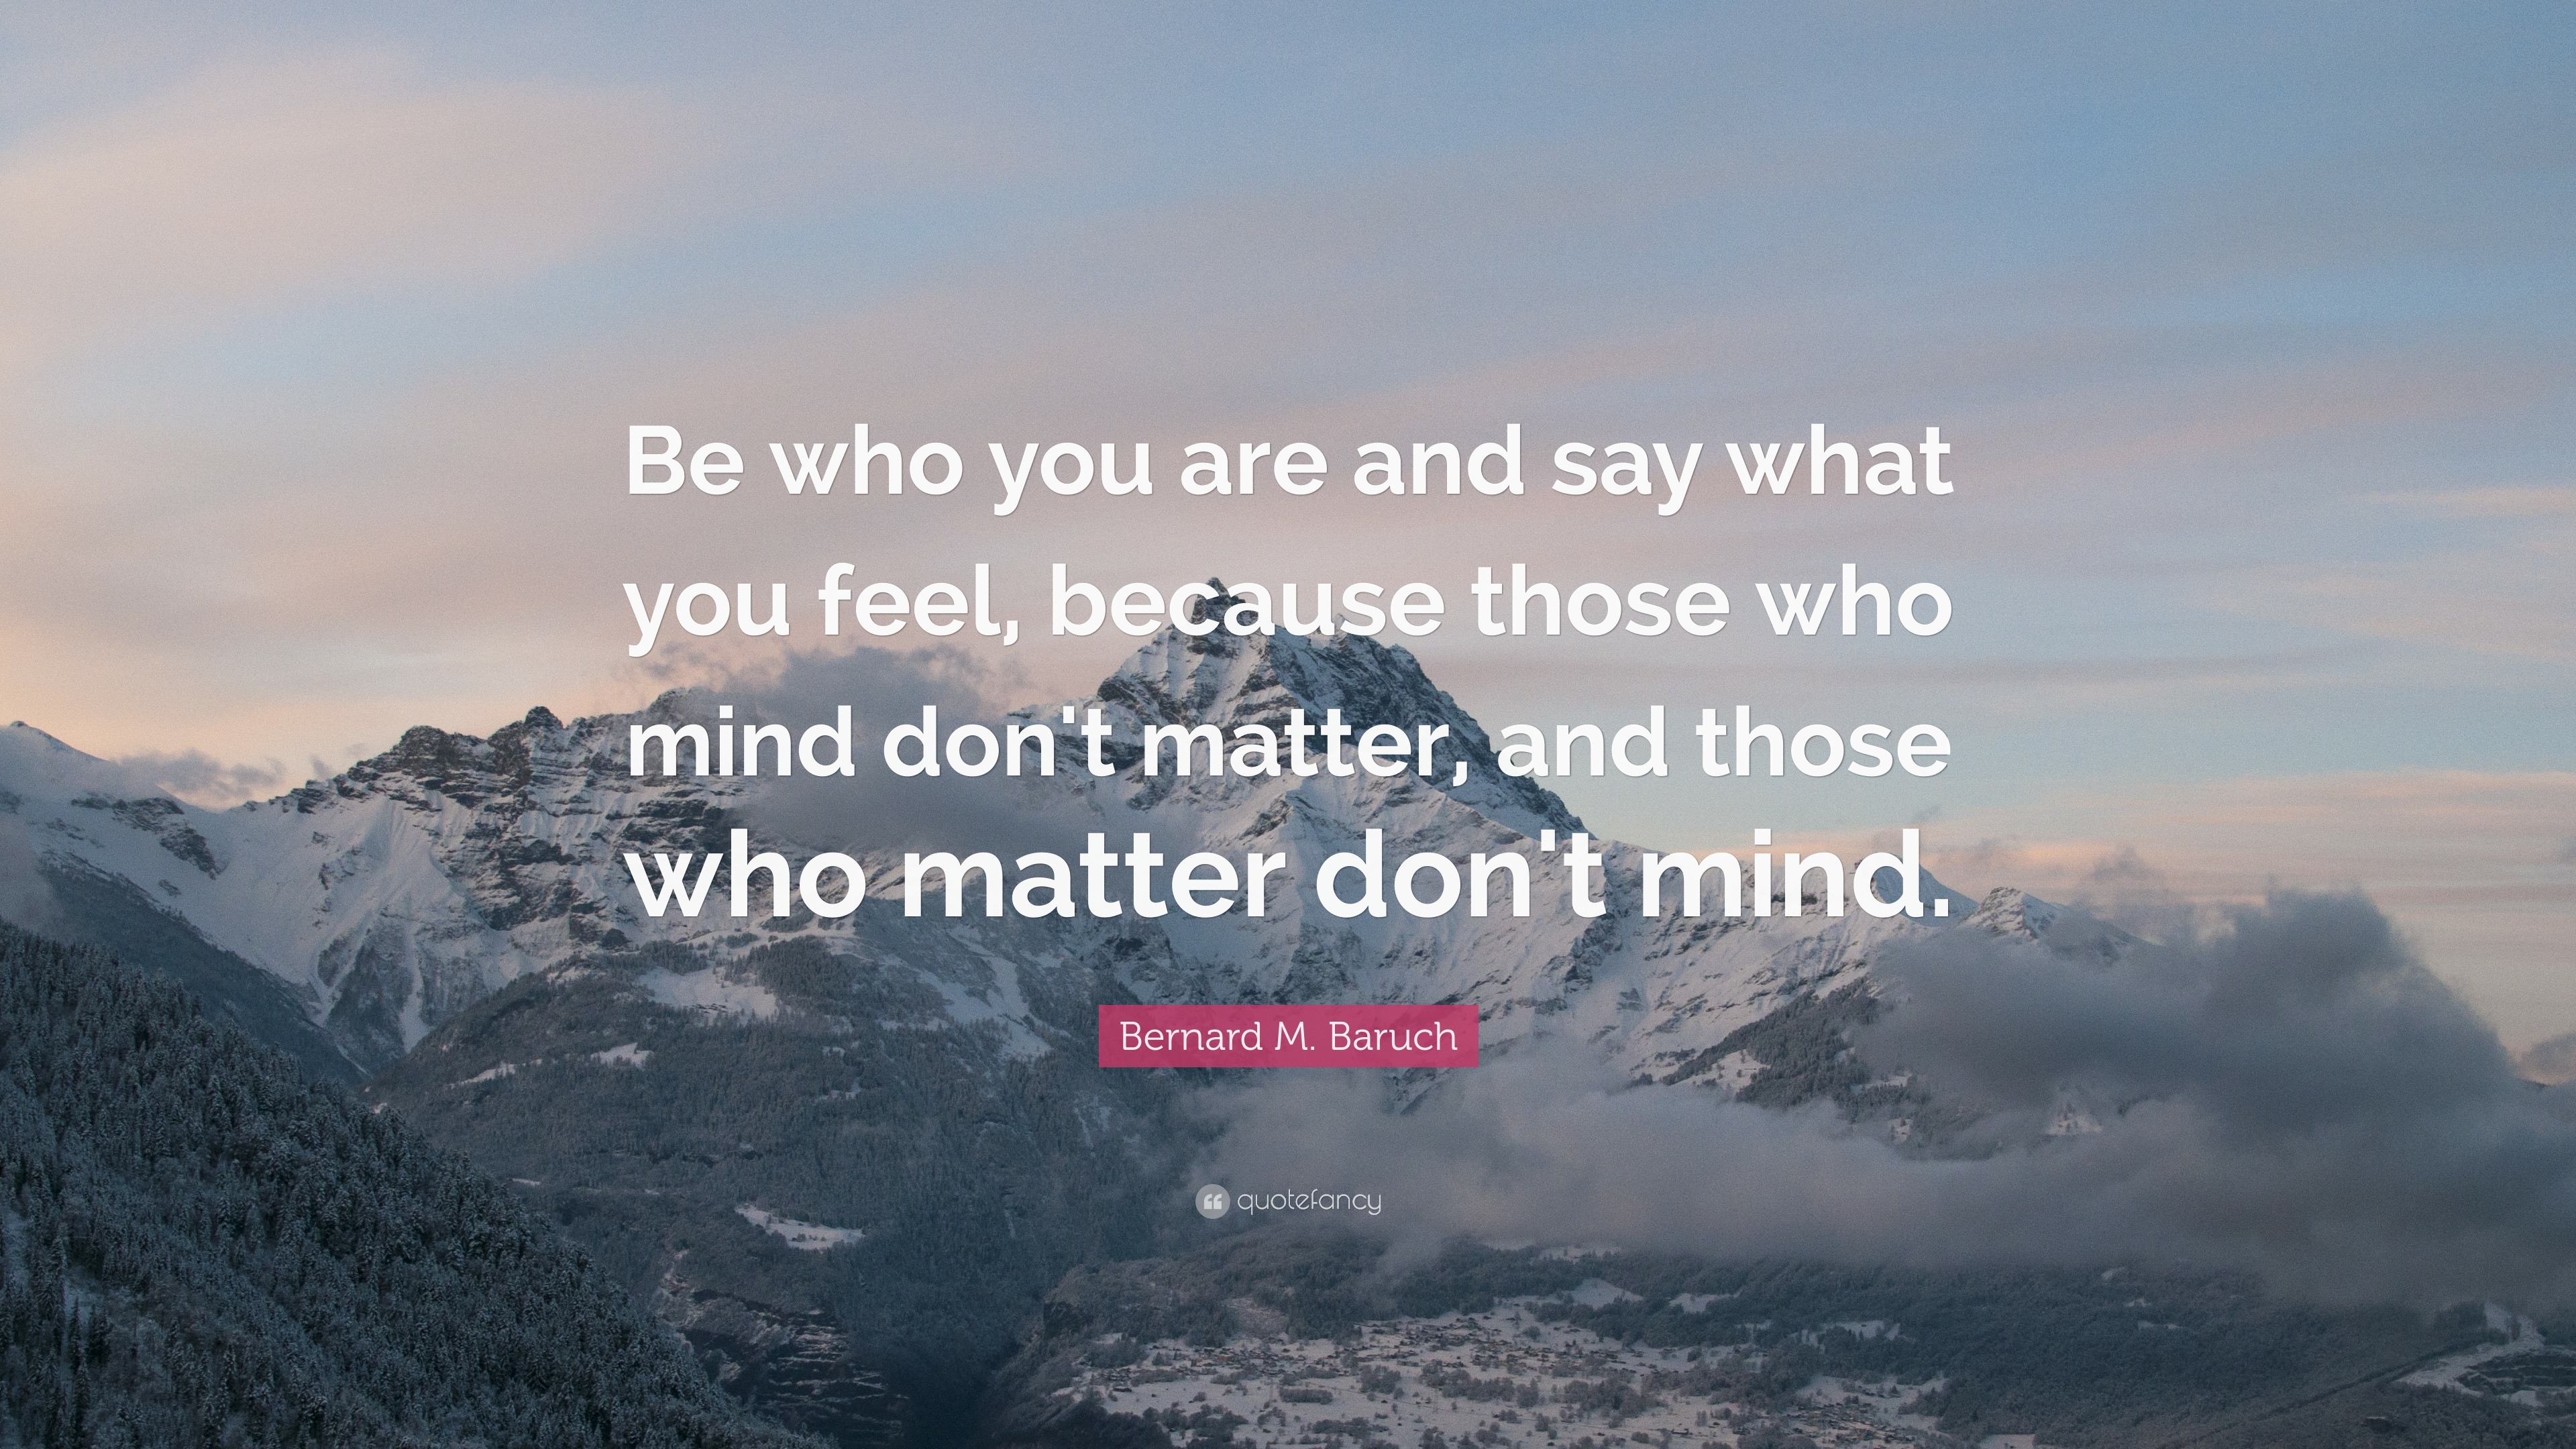 Bernard M. Baruch Quote: "Be who you are and say what you ...